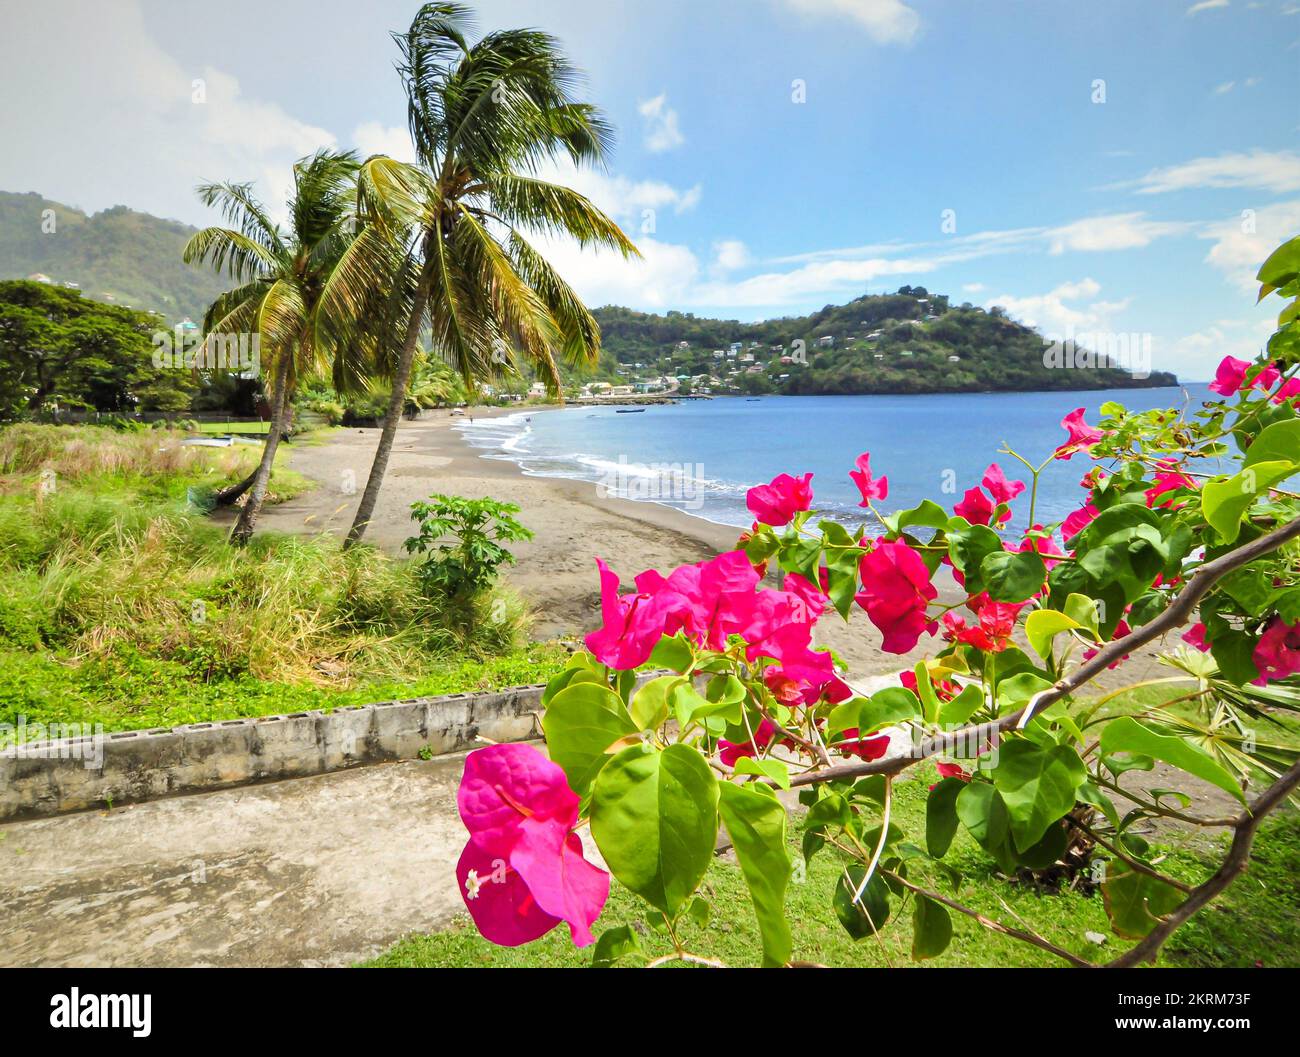 View of a deserted beach in the Grenadine Islands, Caribbean. Stock Photo